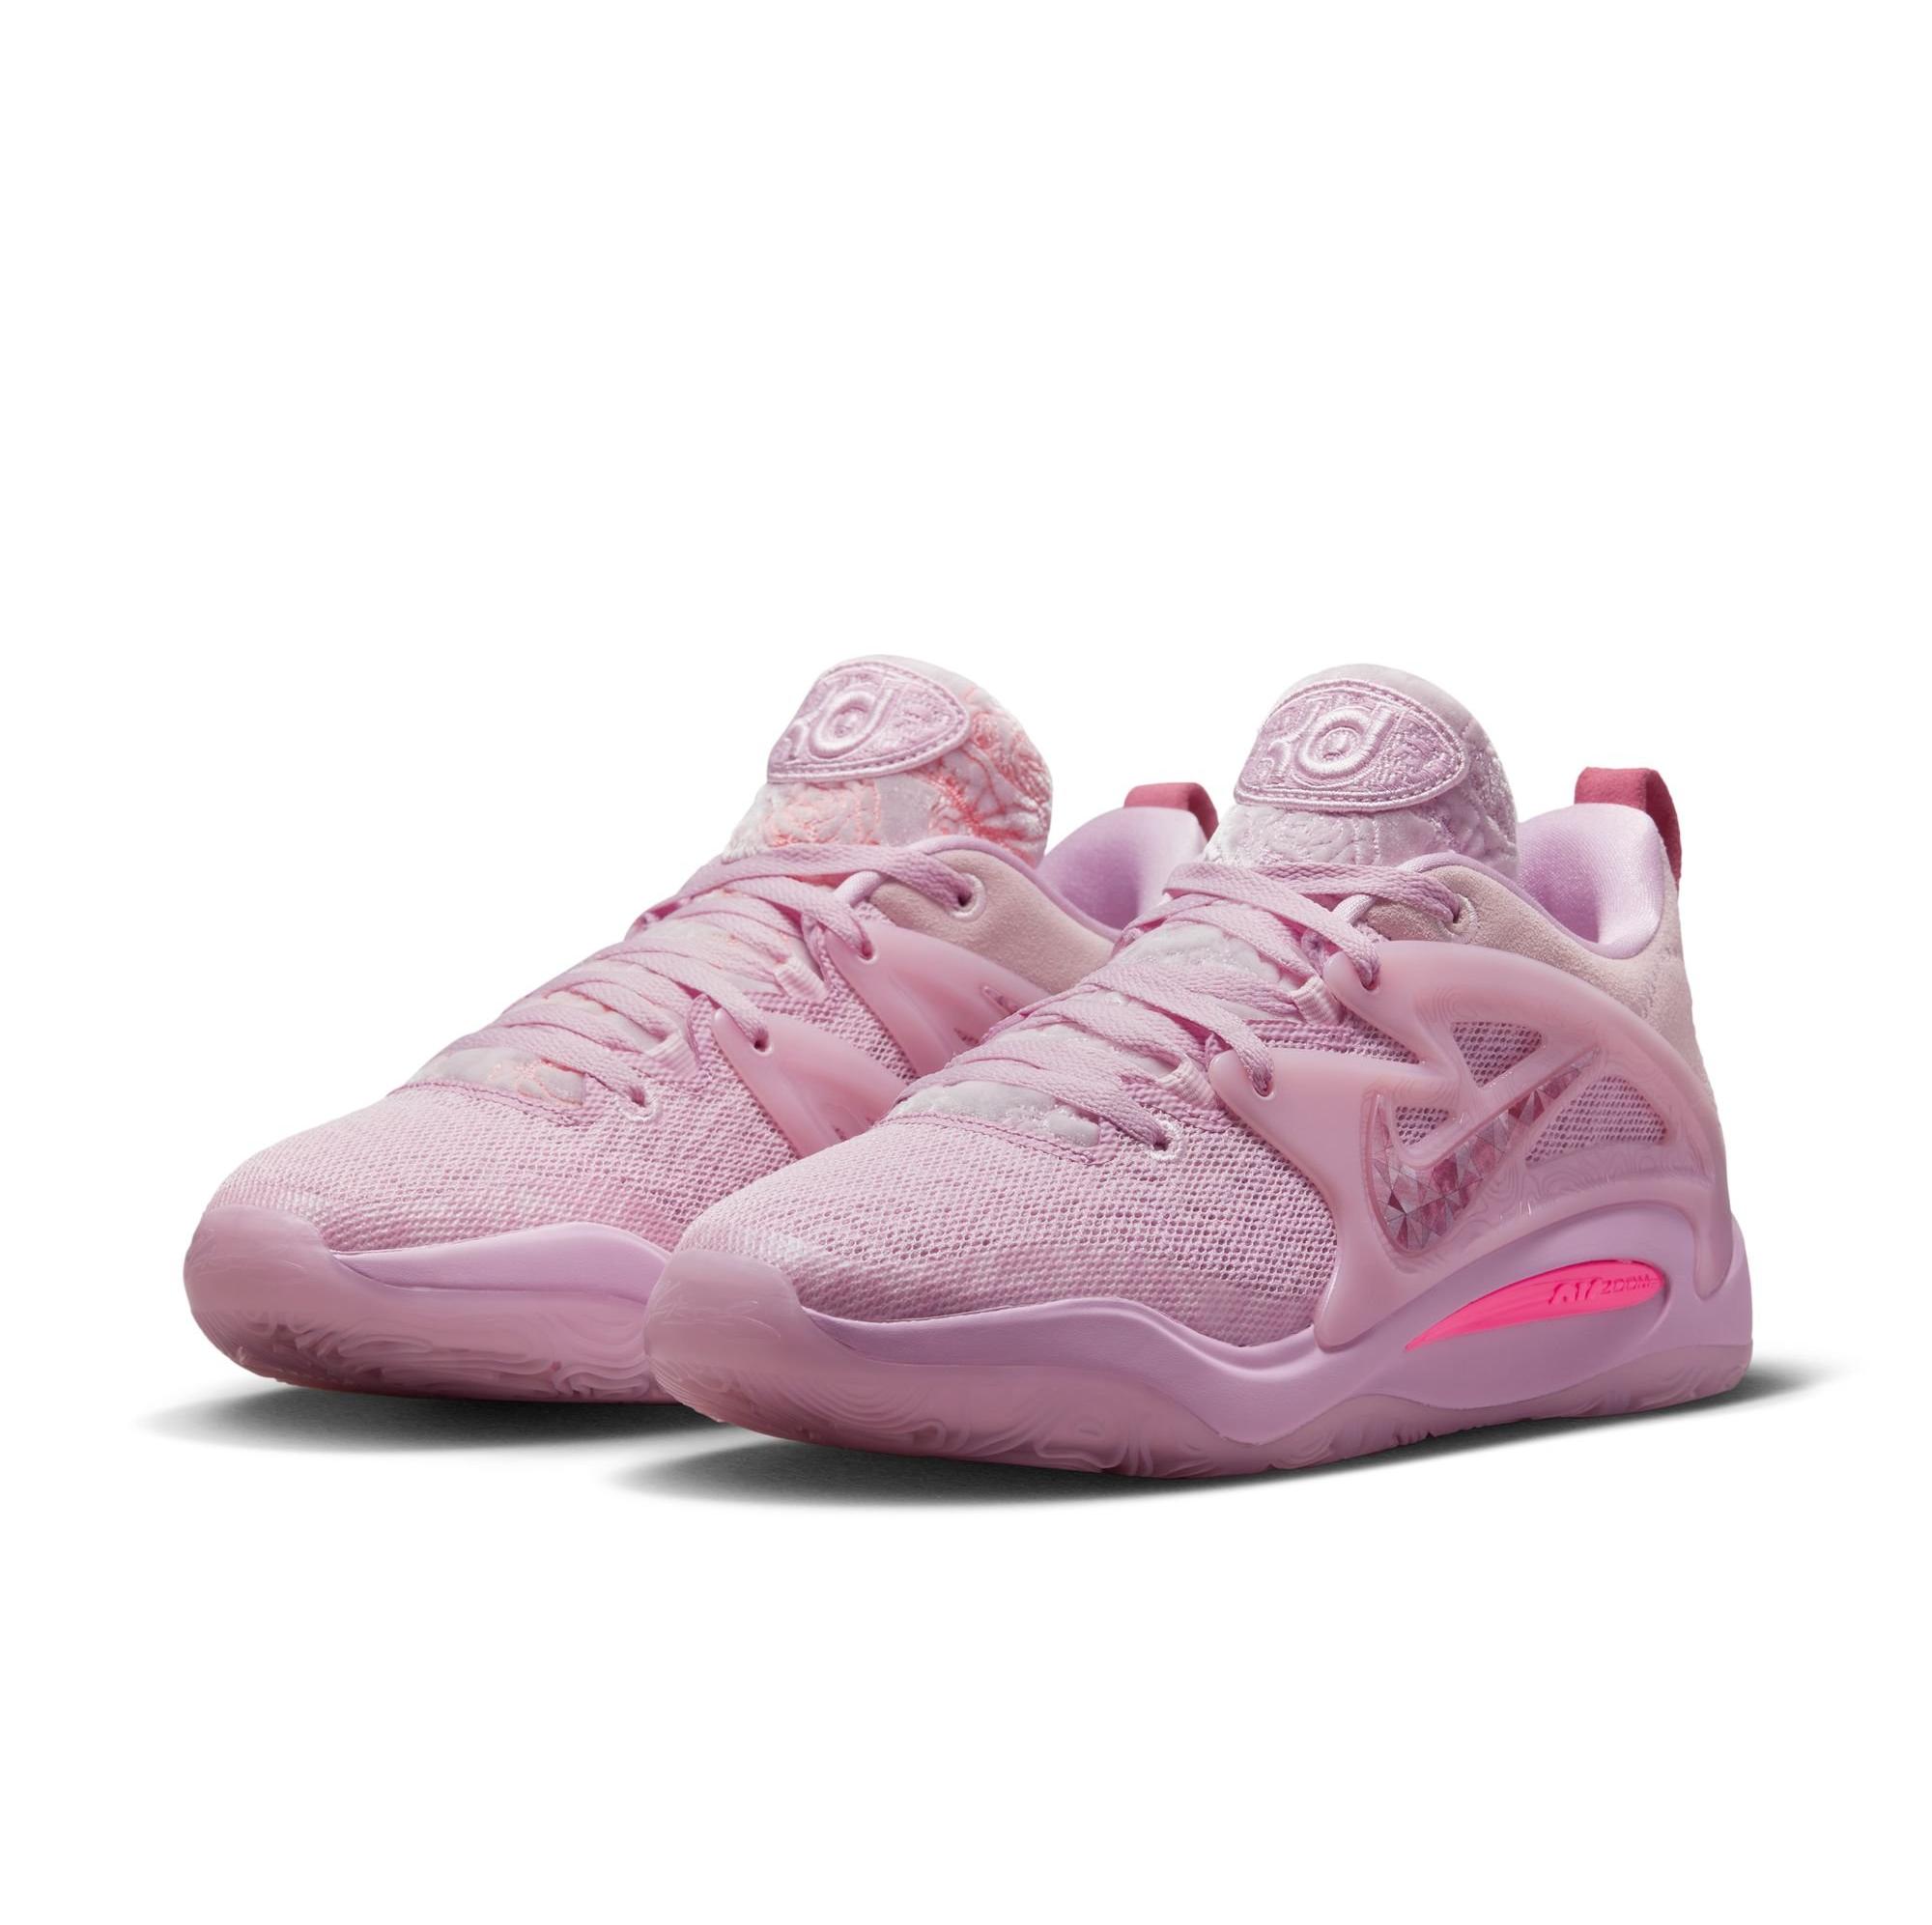 Men's Pink Basketball Shoes Autumn Sneakers Women Sports Boots